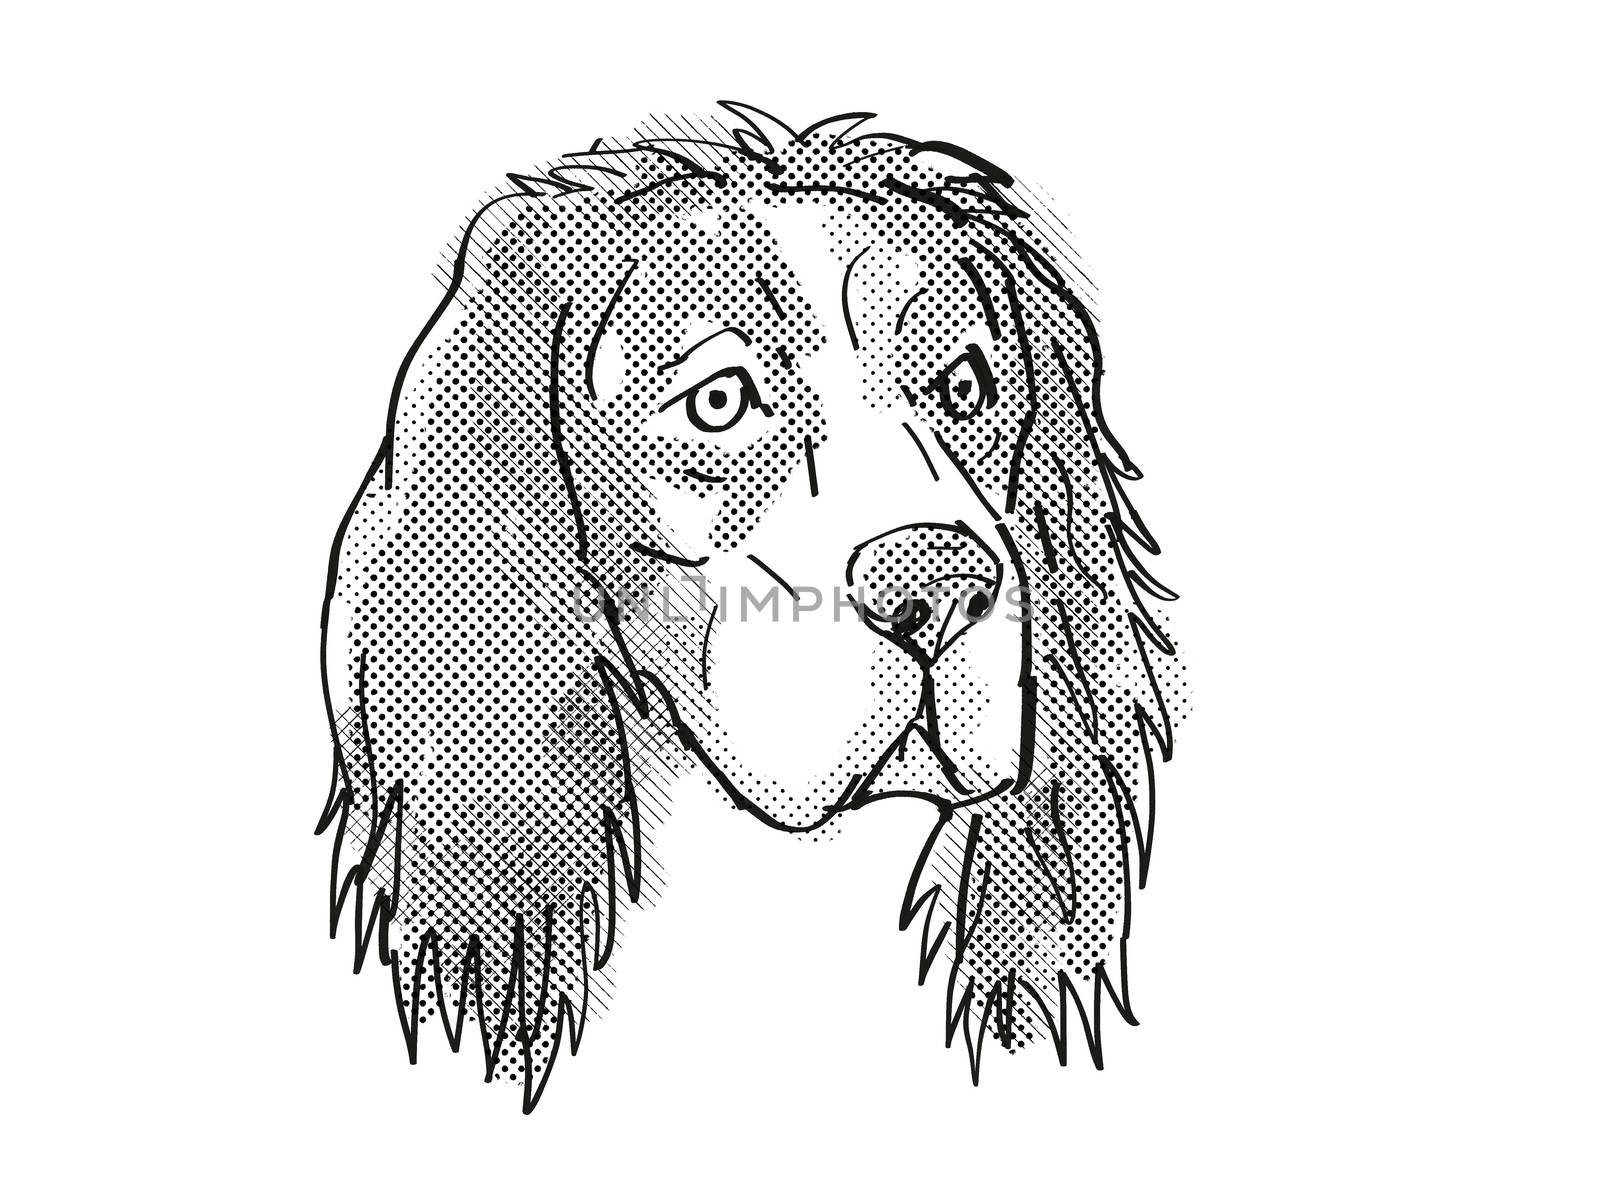 Retro cartoon style drawing of head of an English Setter, a domestic dog or canine breed on isolated white background done in black and white.